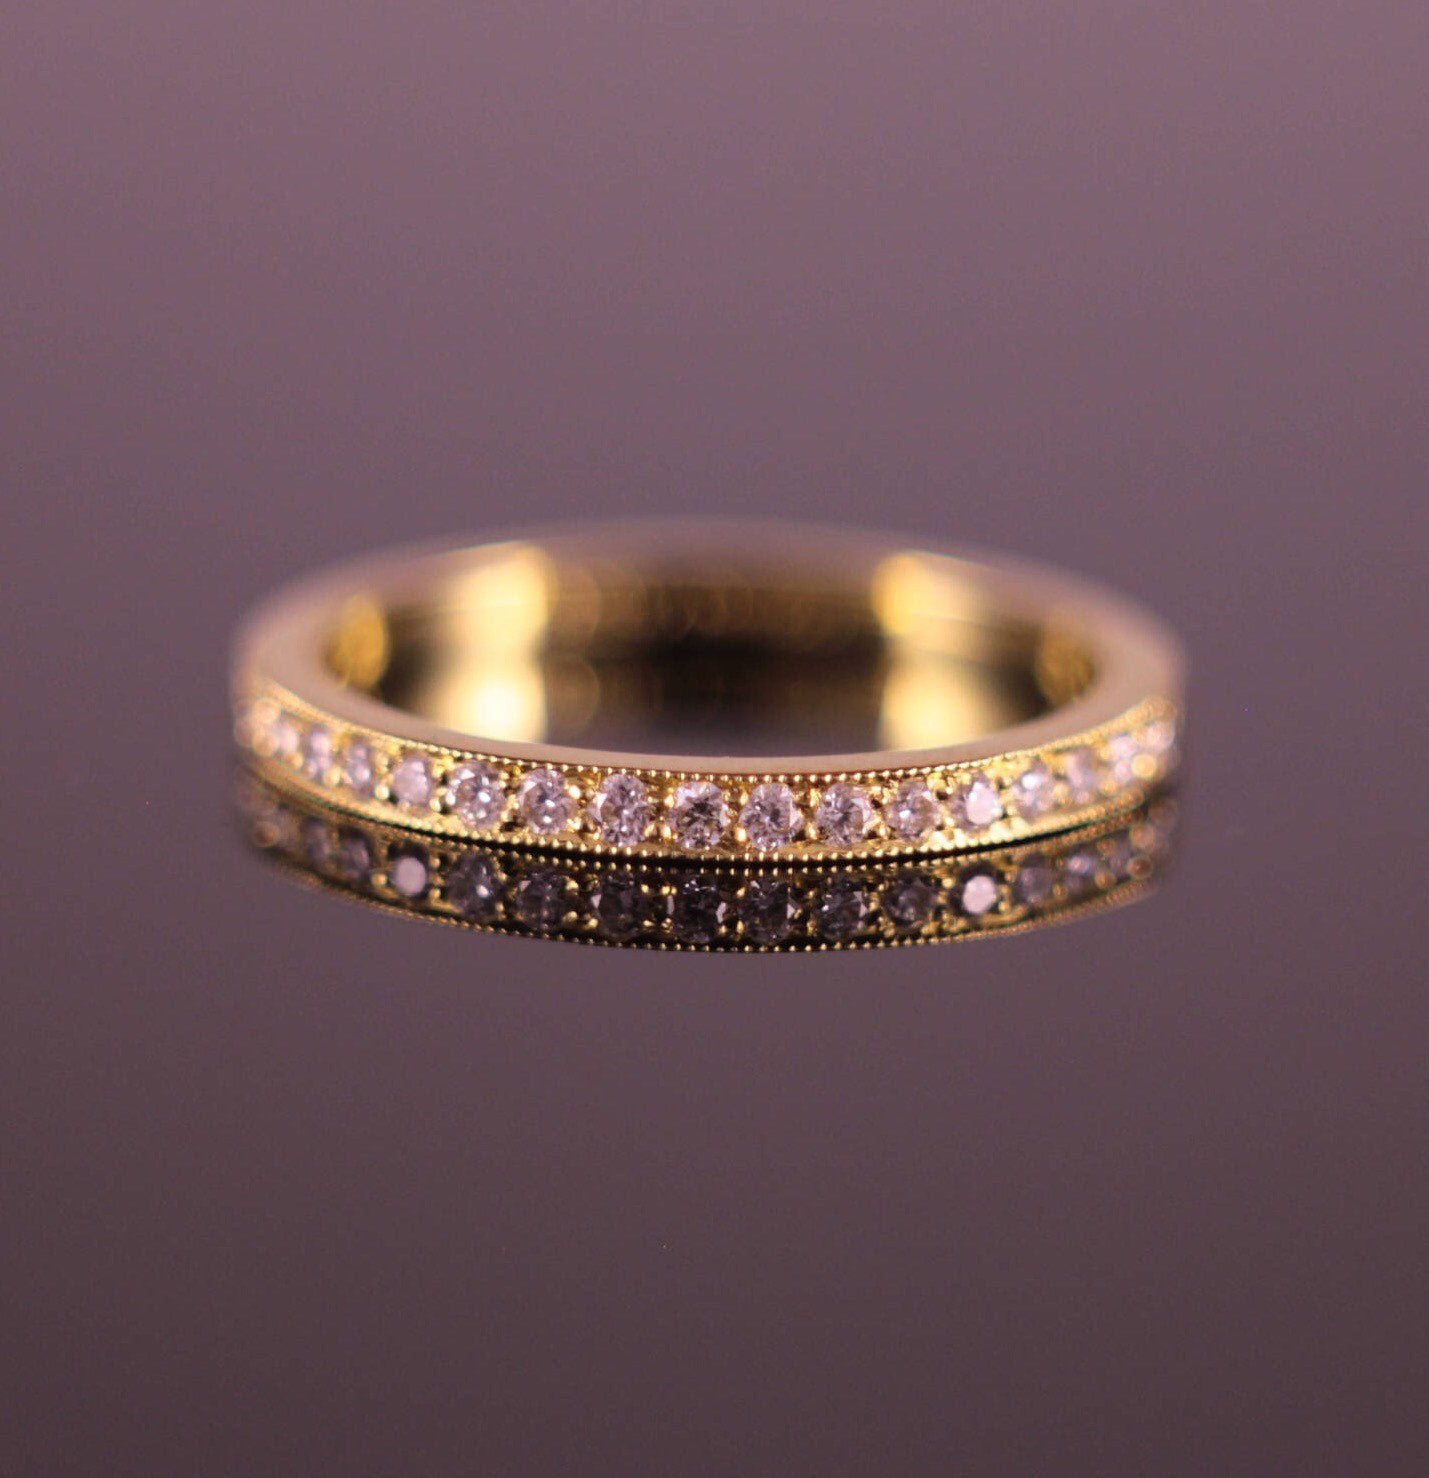 18ct Yellow Gold Half Eternity Ring 1.8mm wide with Round Brilliant Diamonds 0.17tcw Pave Millegrain